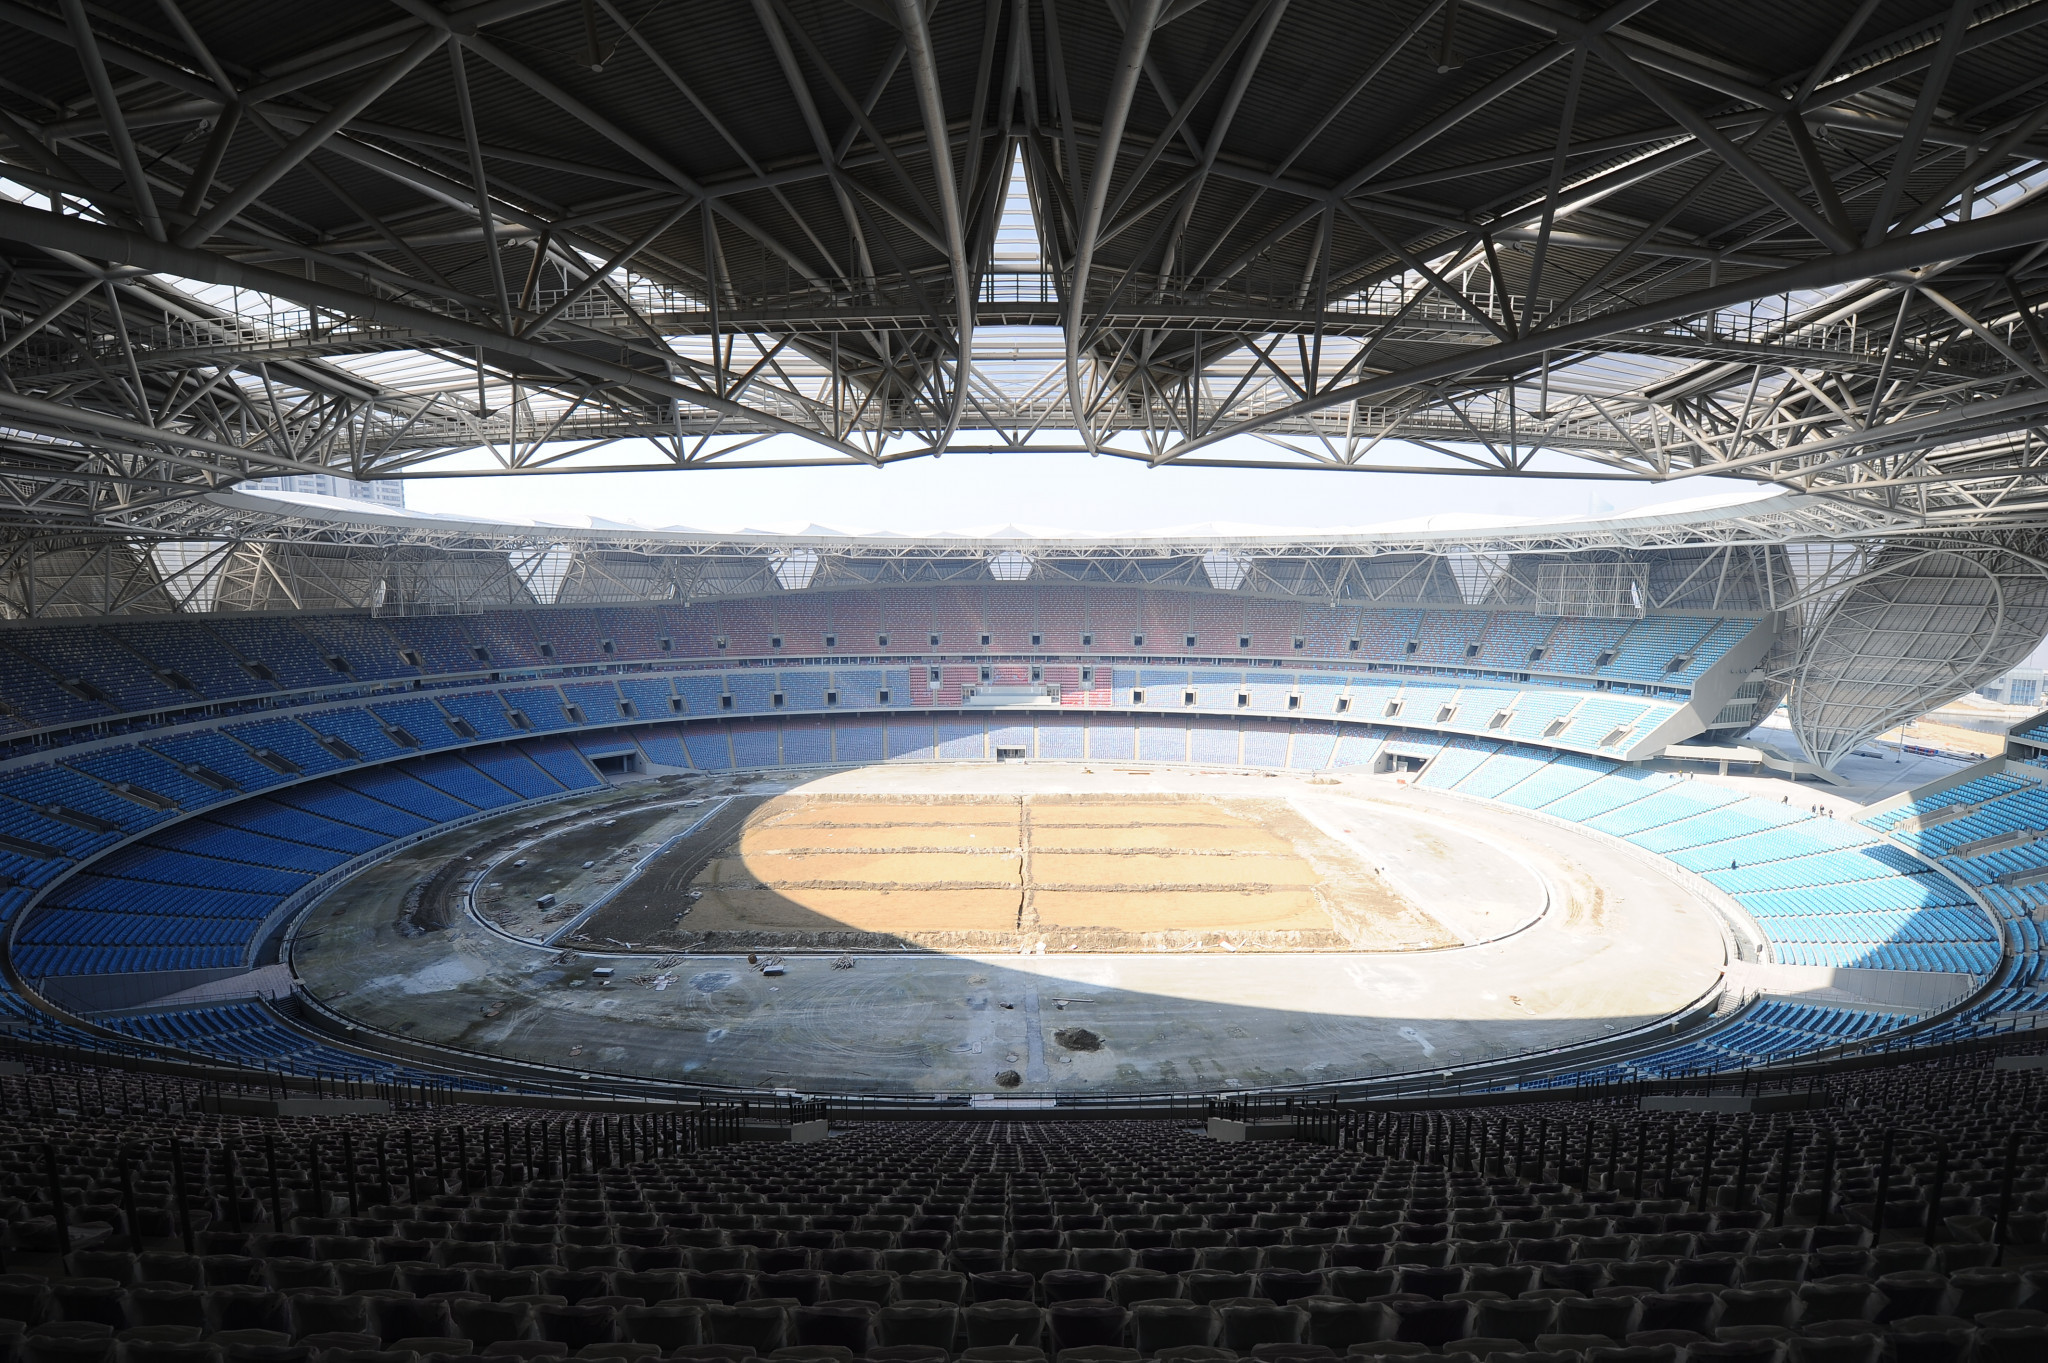 The stadium was completed in 2018 and will host Ceremonies and athletics at the next Asian Games ©Getty Images